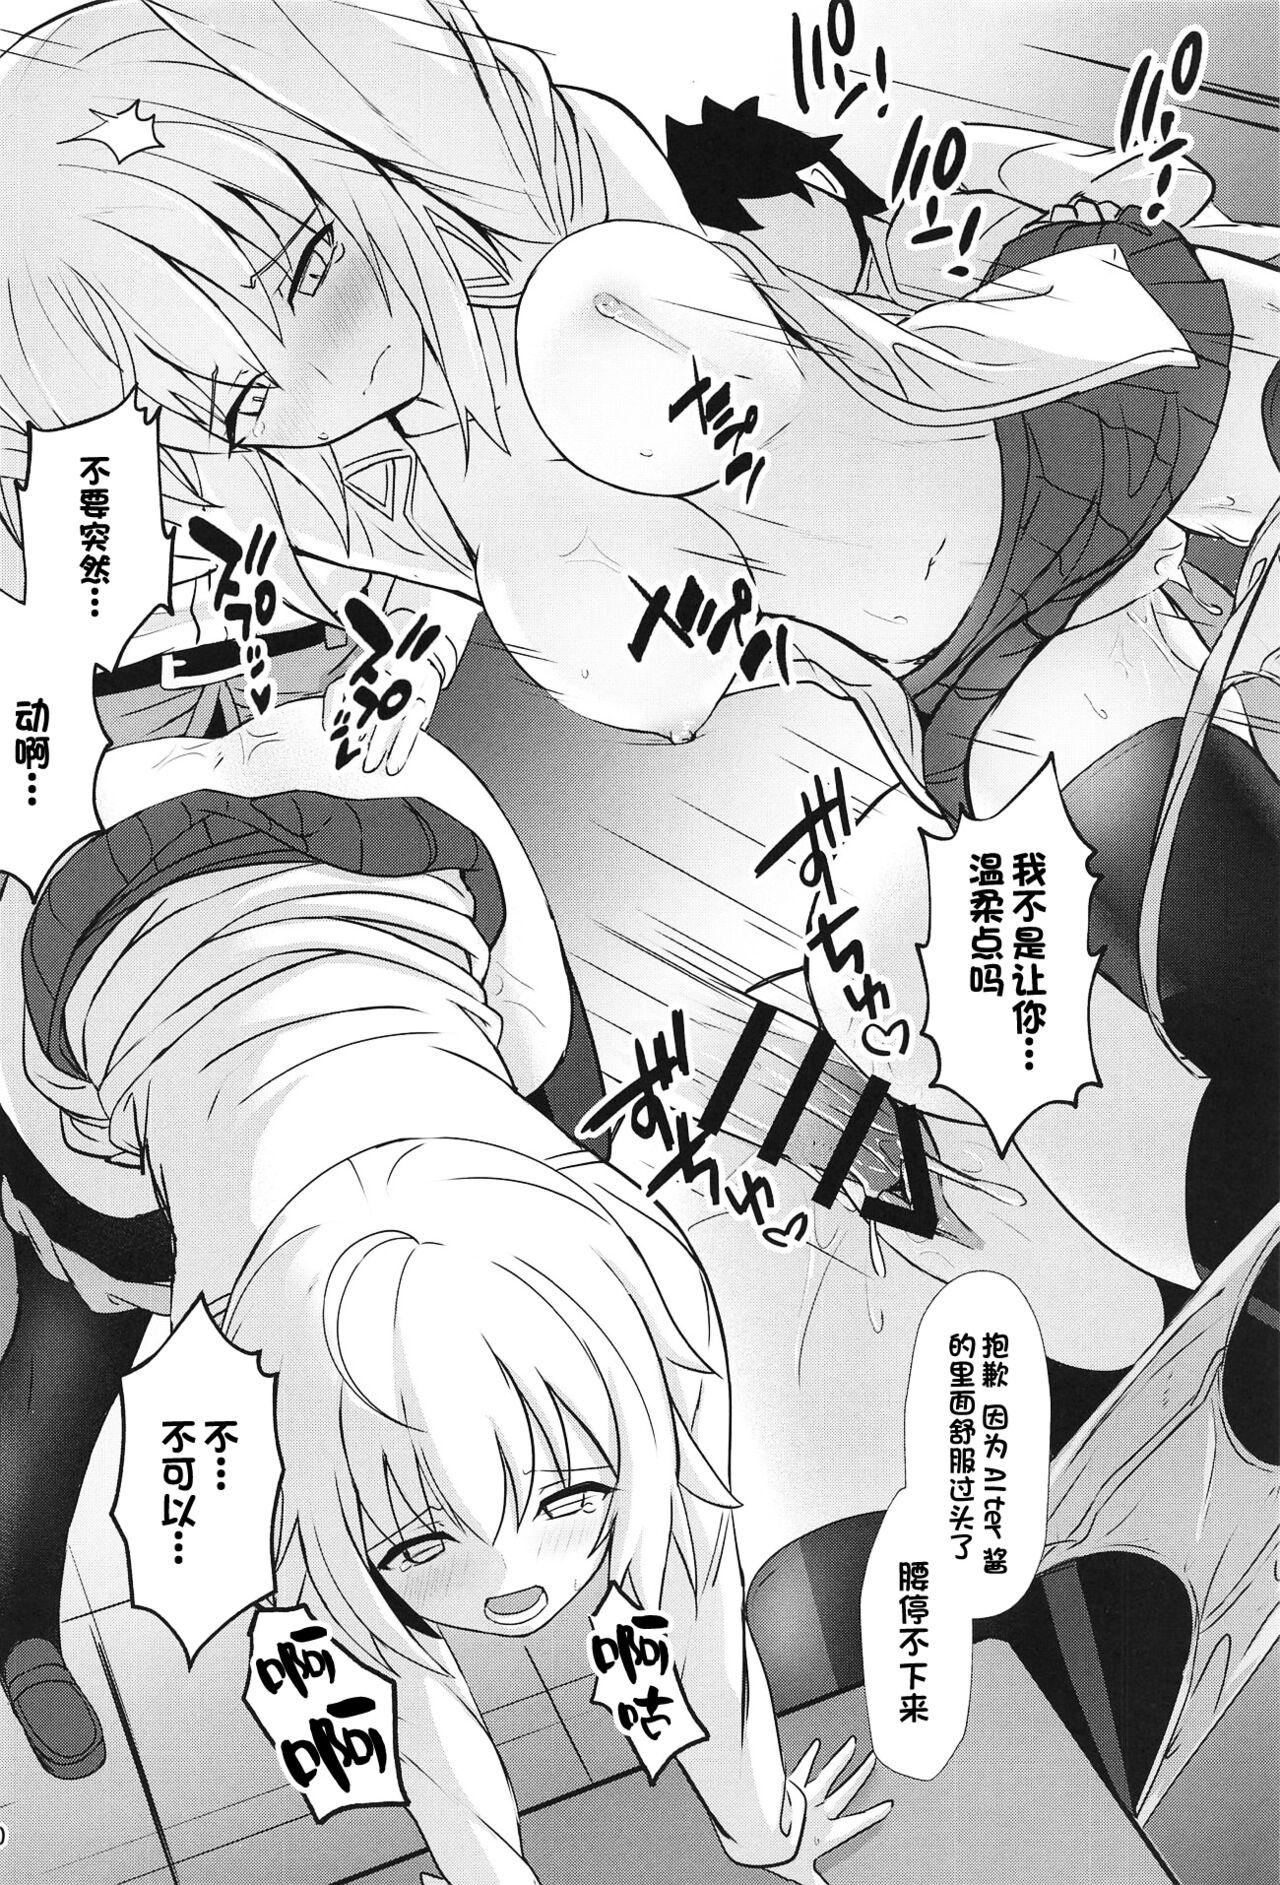 Red Head ときめきカルデア学園オルタナティ部 - Fate grand order Petite - Page 9